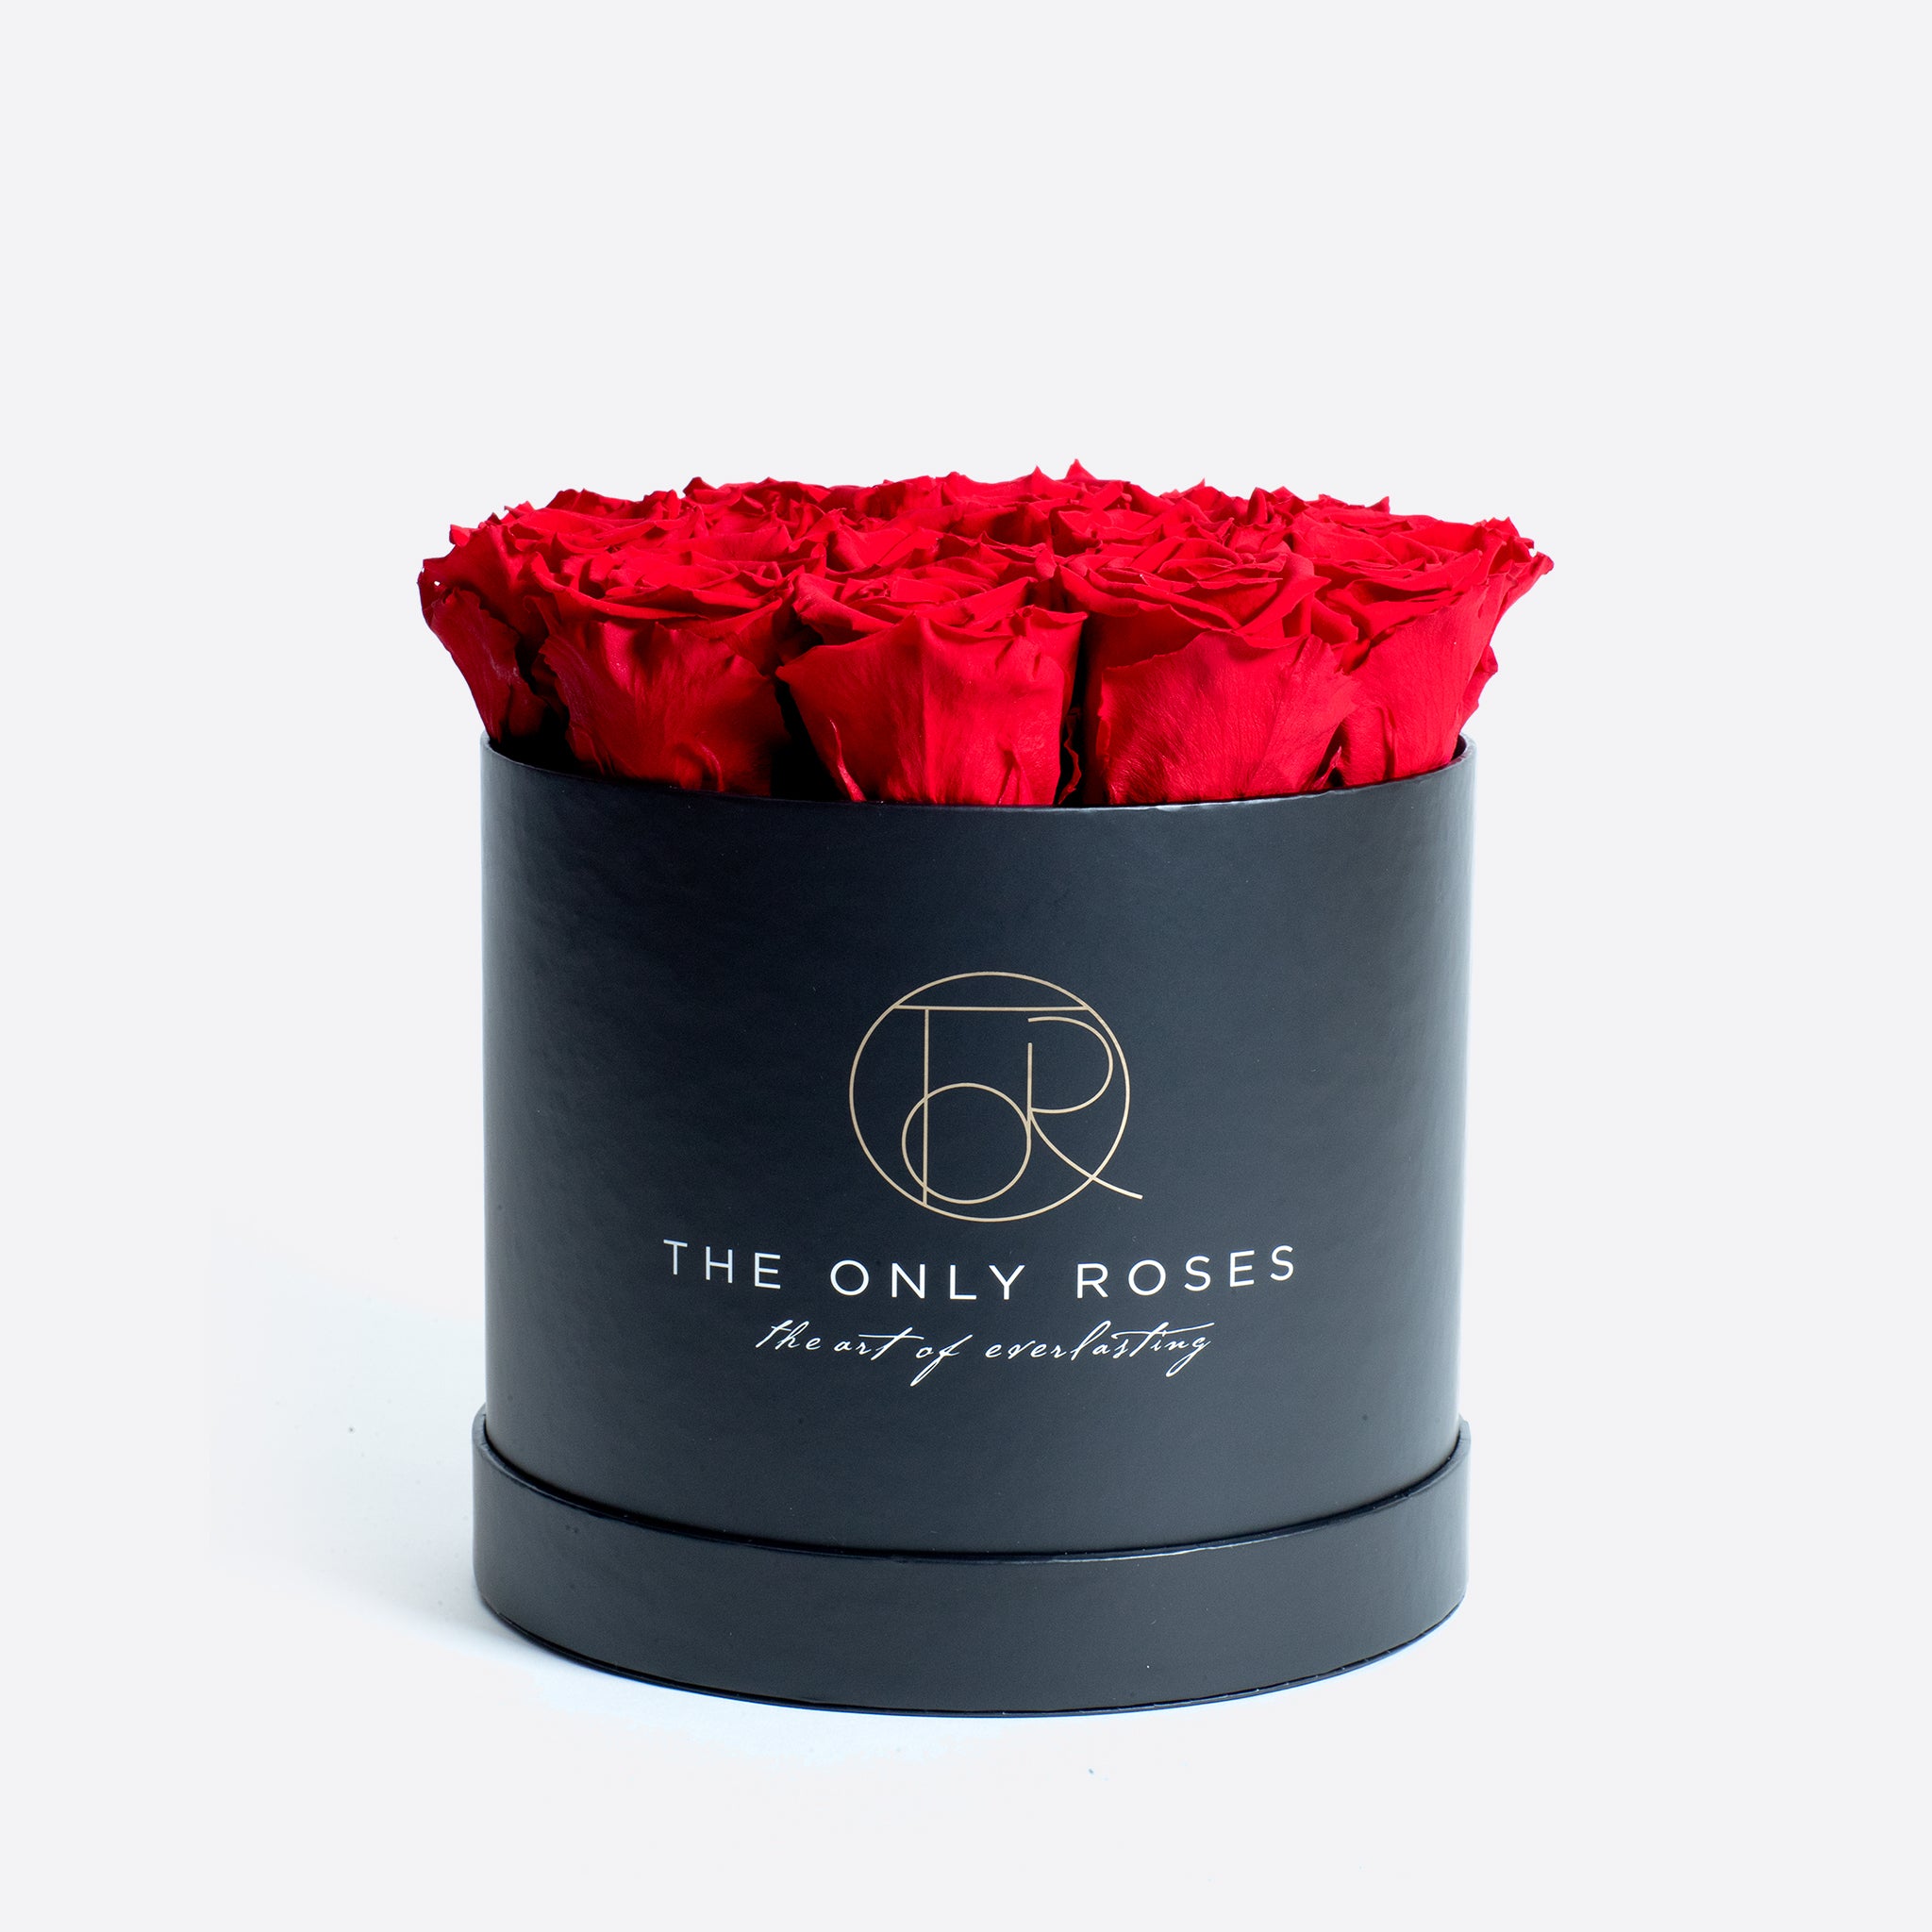 Medium Round Black Hat Box with Two Dozen Red Everlasting Preserved Roses | The Only Roses